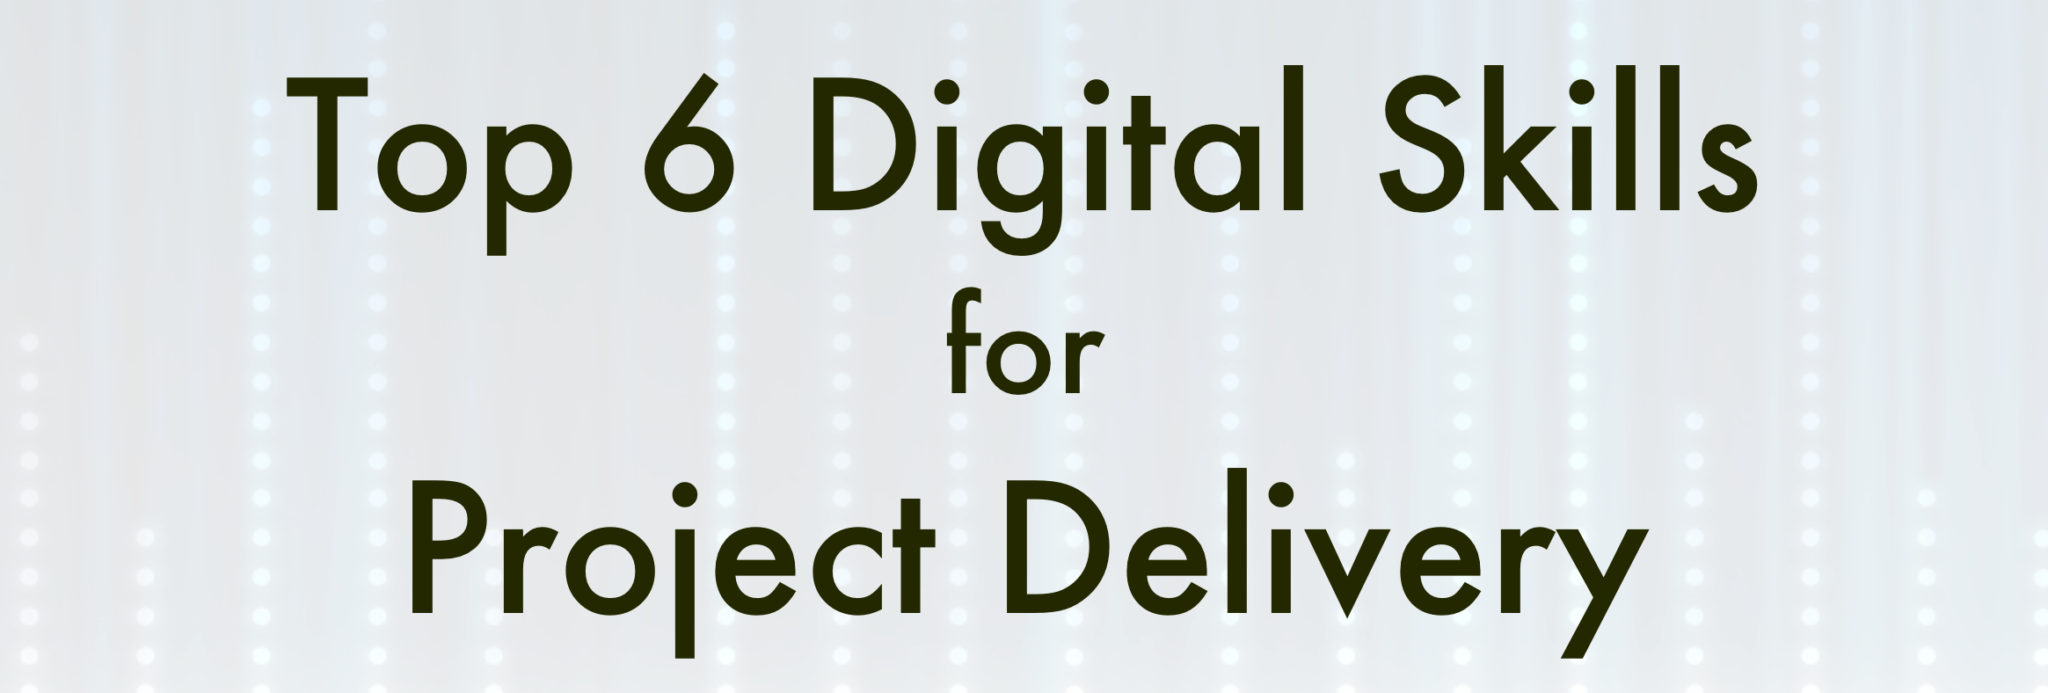 Top 6 Digital Skills for Project Delivery